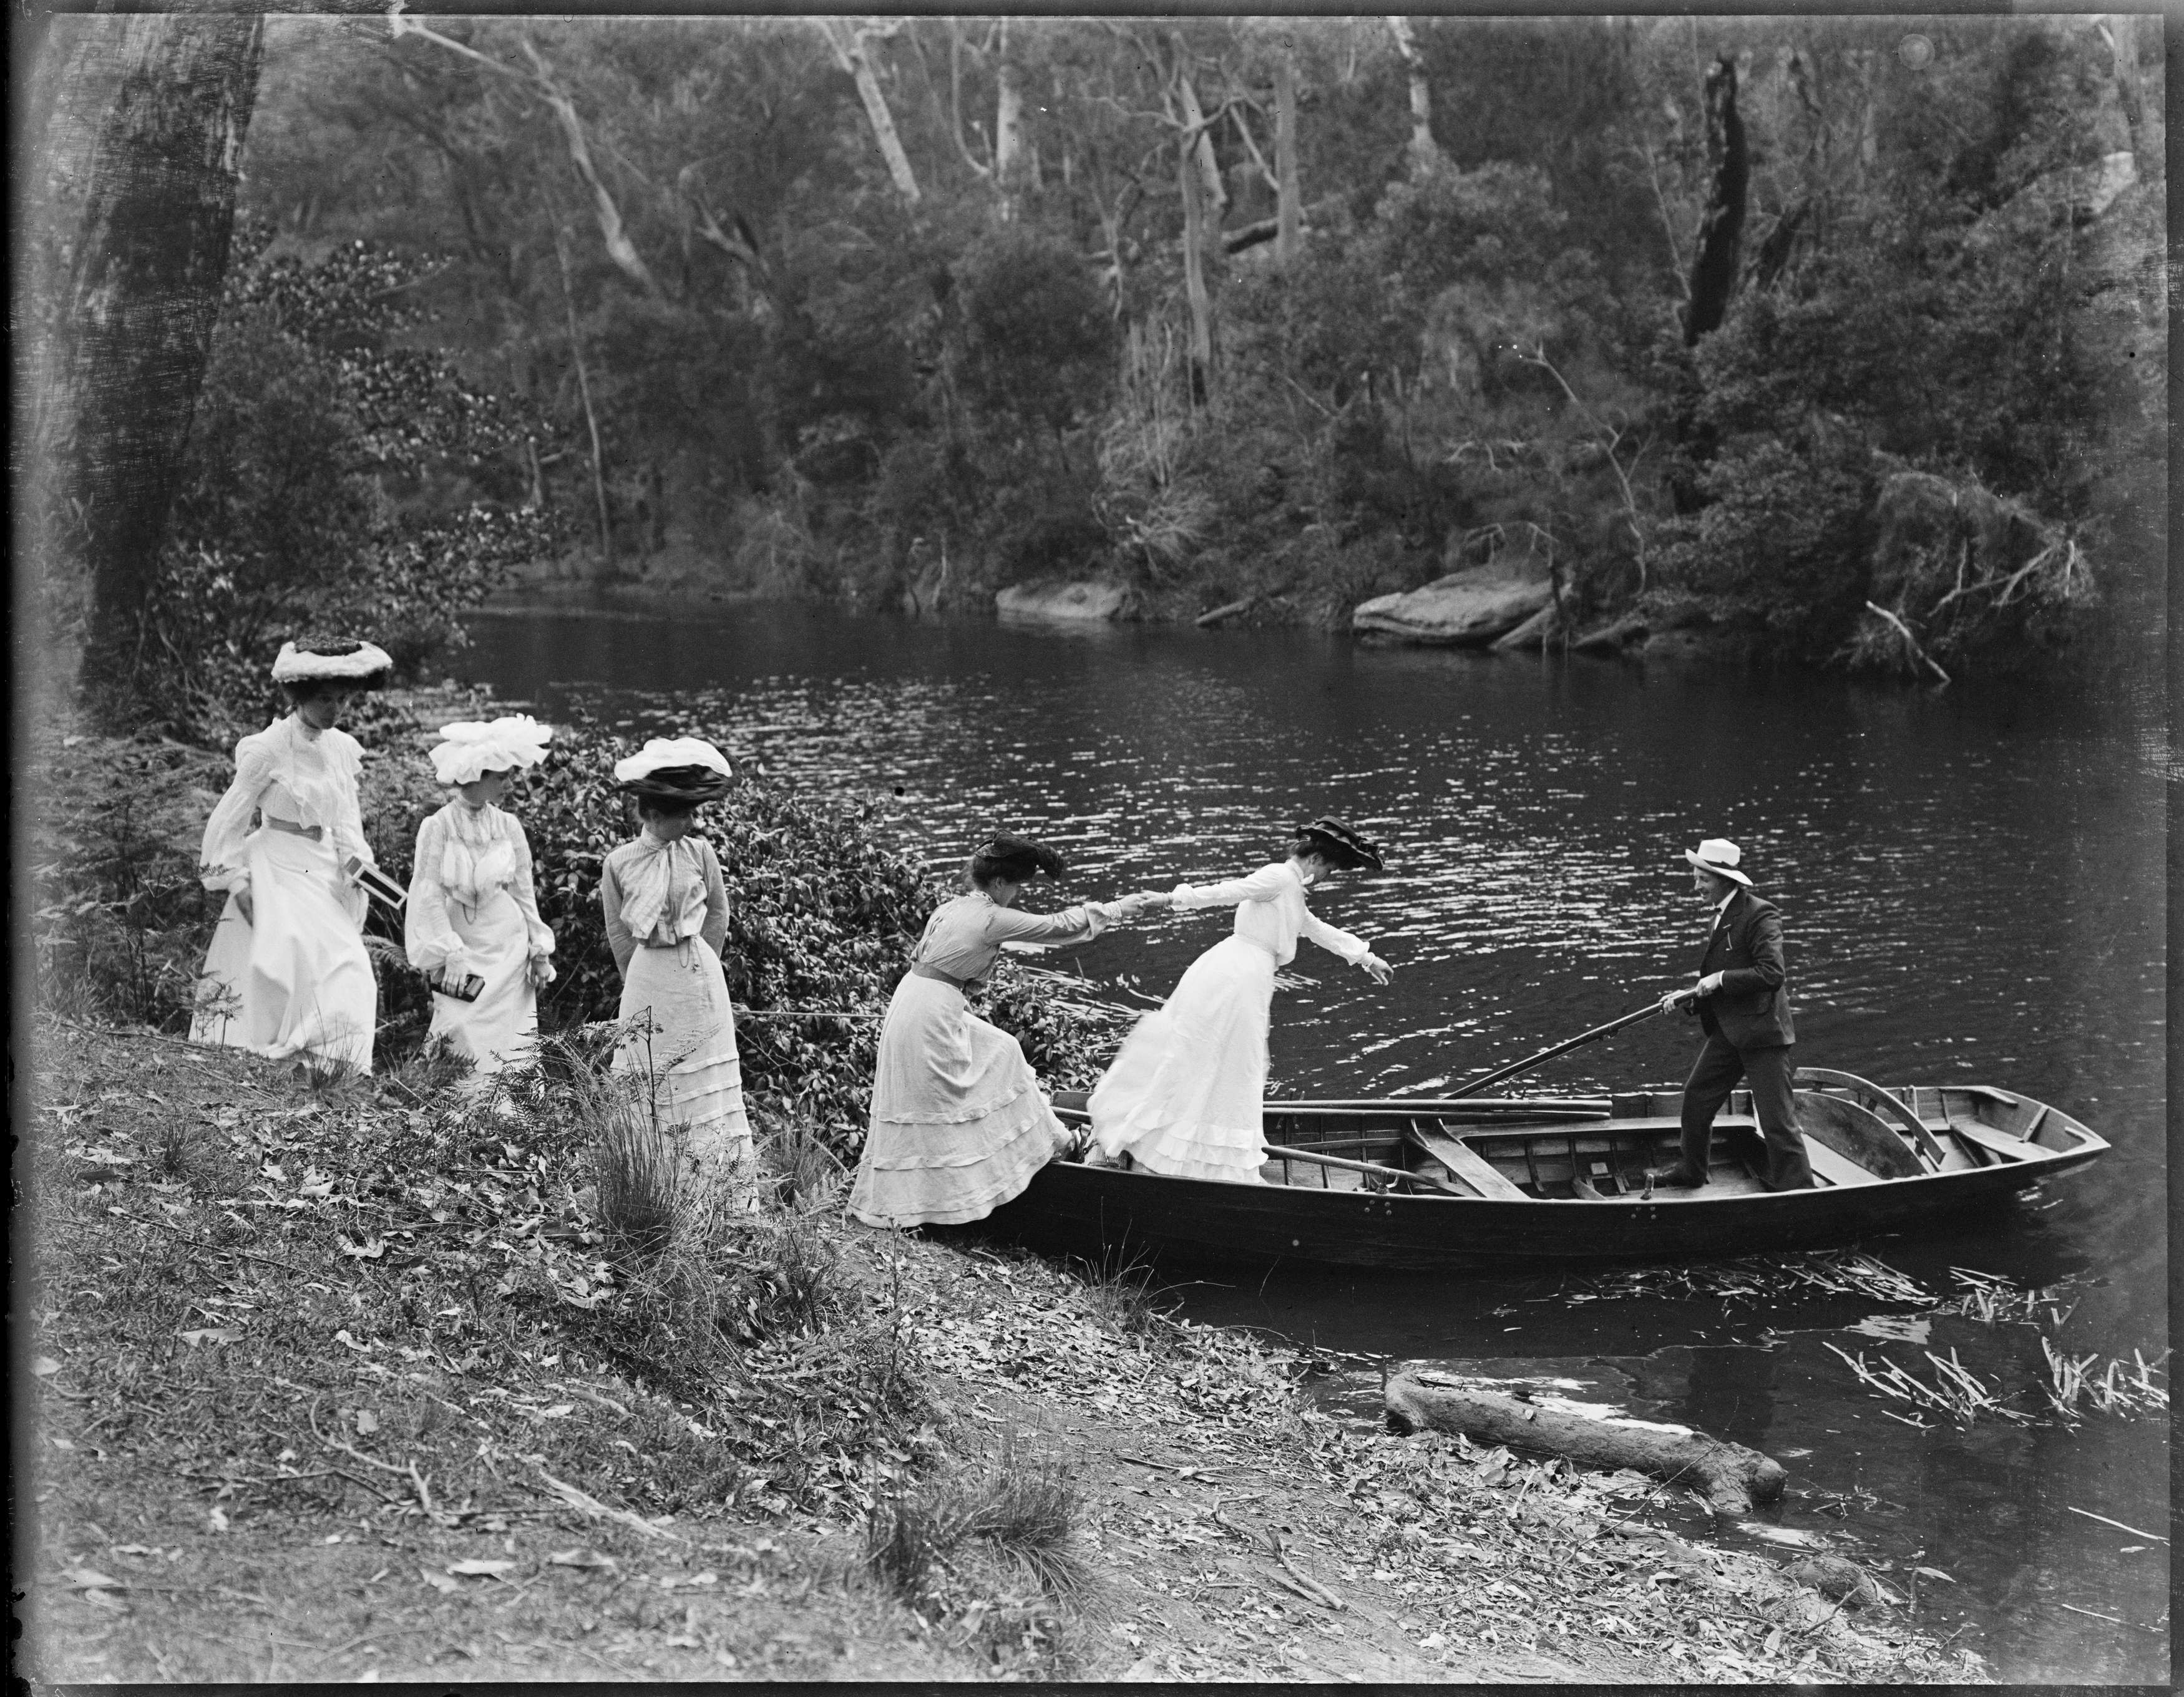 Box 04: Glass negatives of Sydney and Manly areas, ca 1890-1910